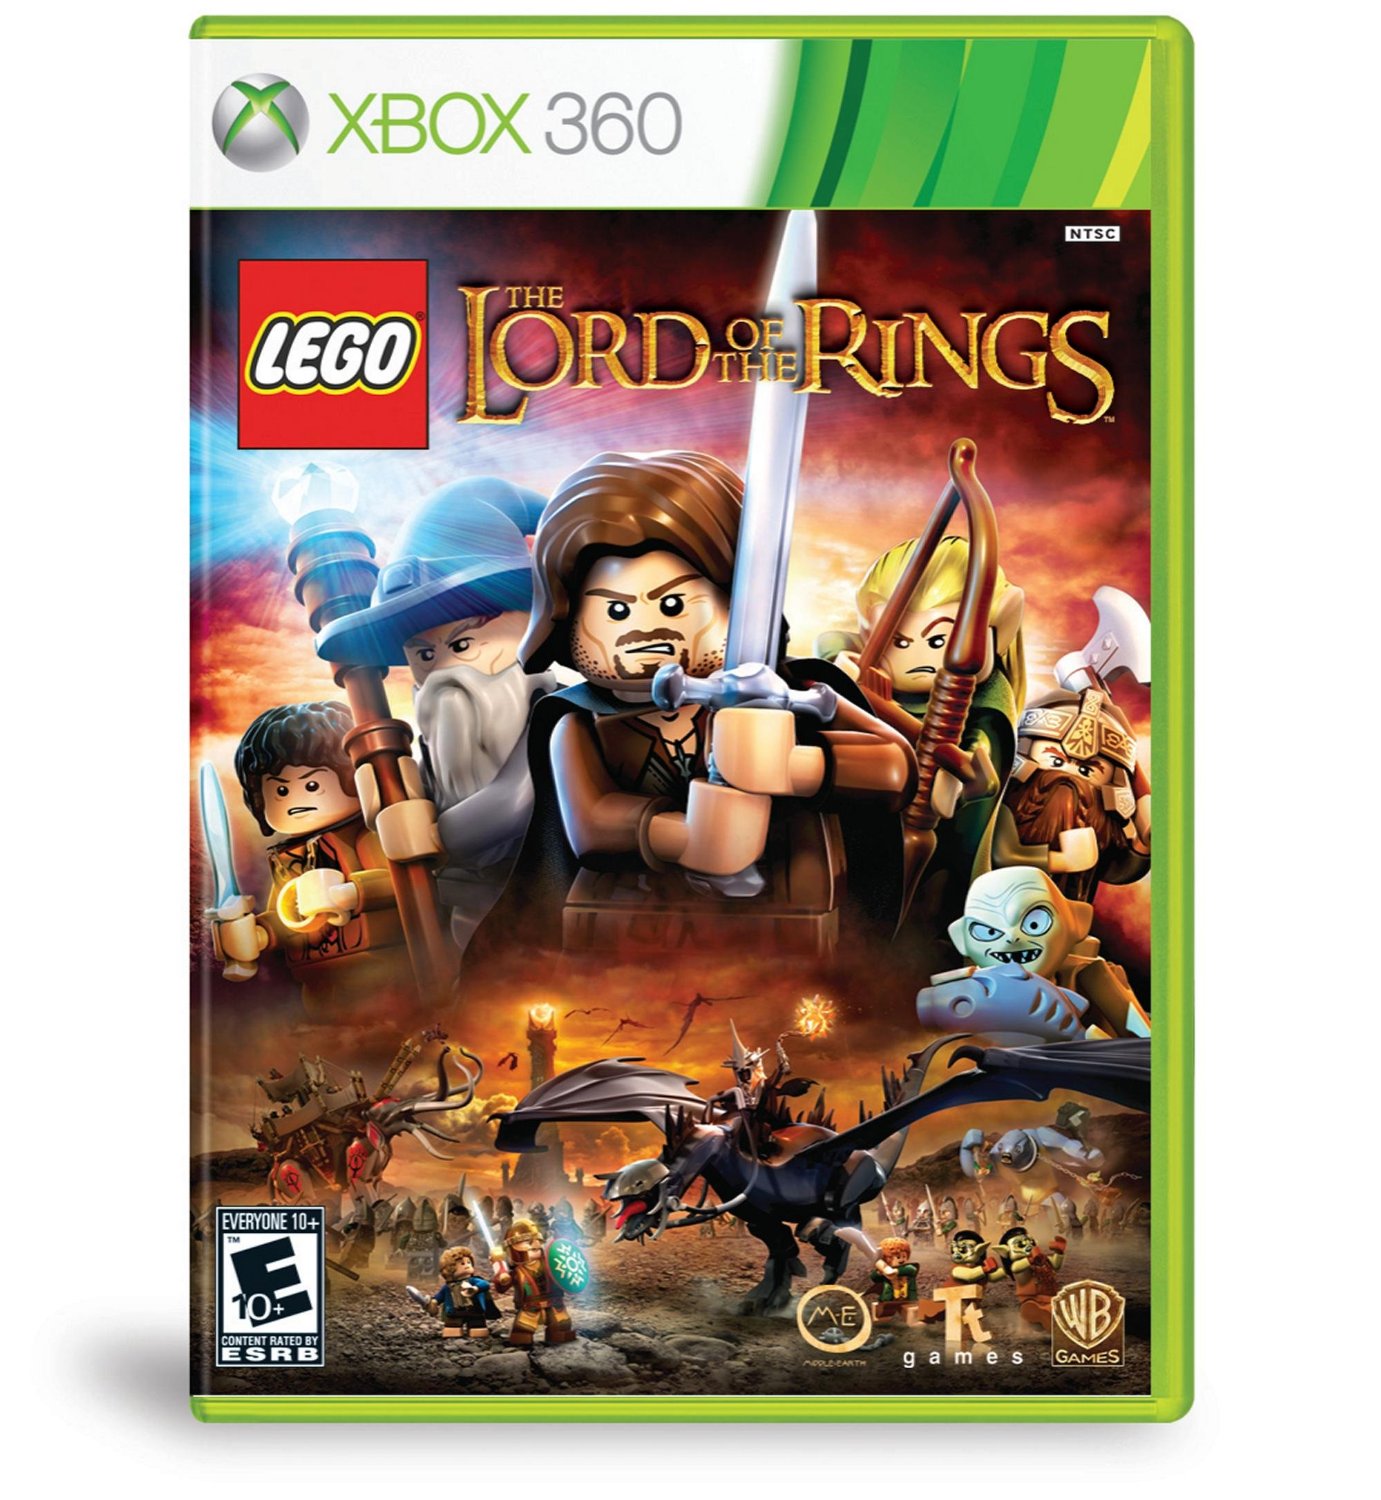 LEGO Lord Of The Rings Xbox 360 Game Just 10 (Reg. 39.99)